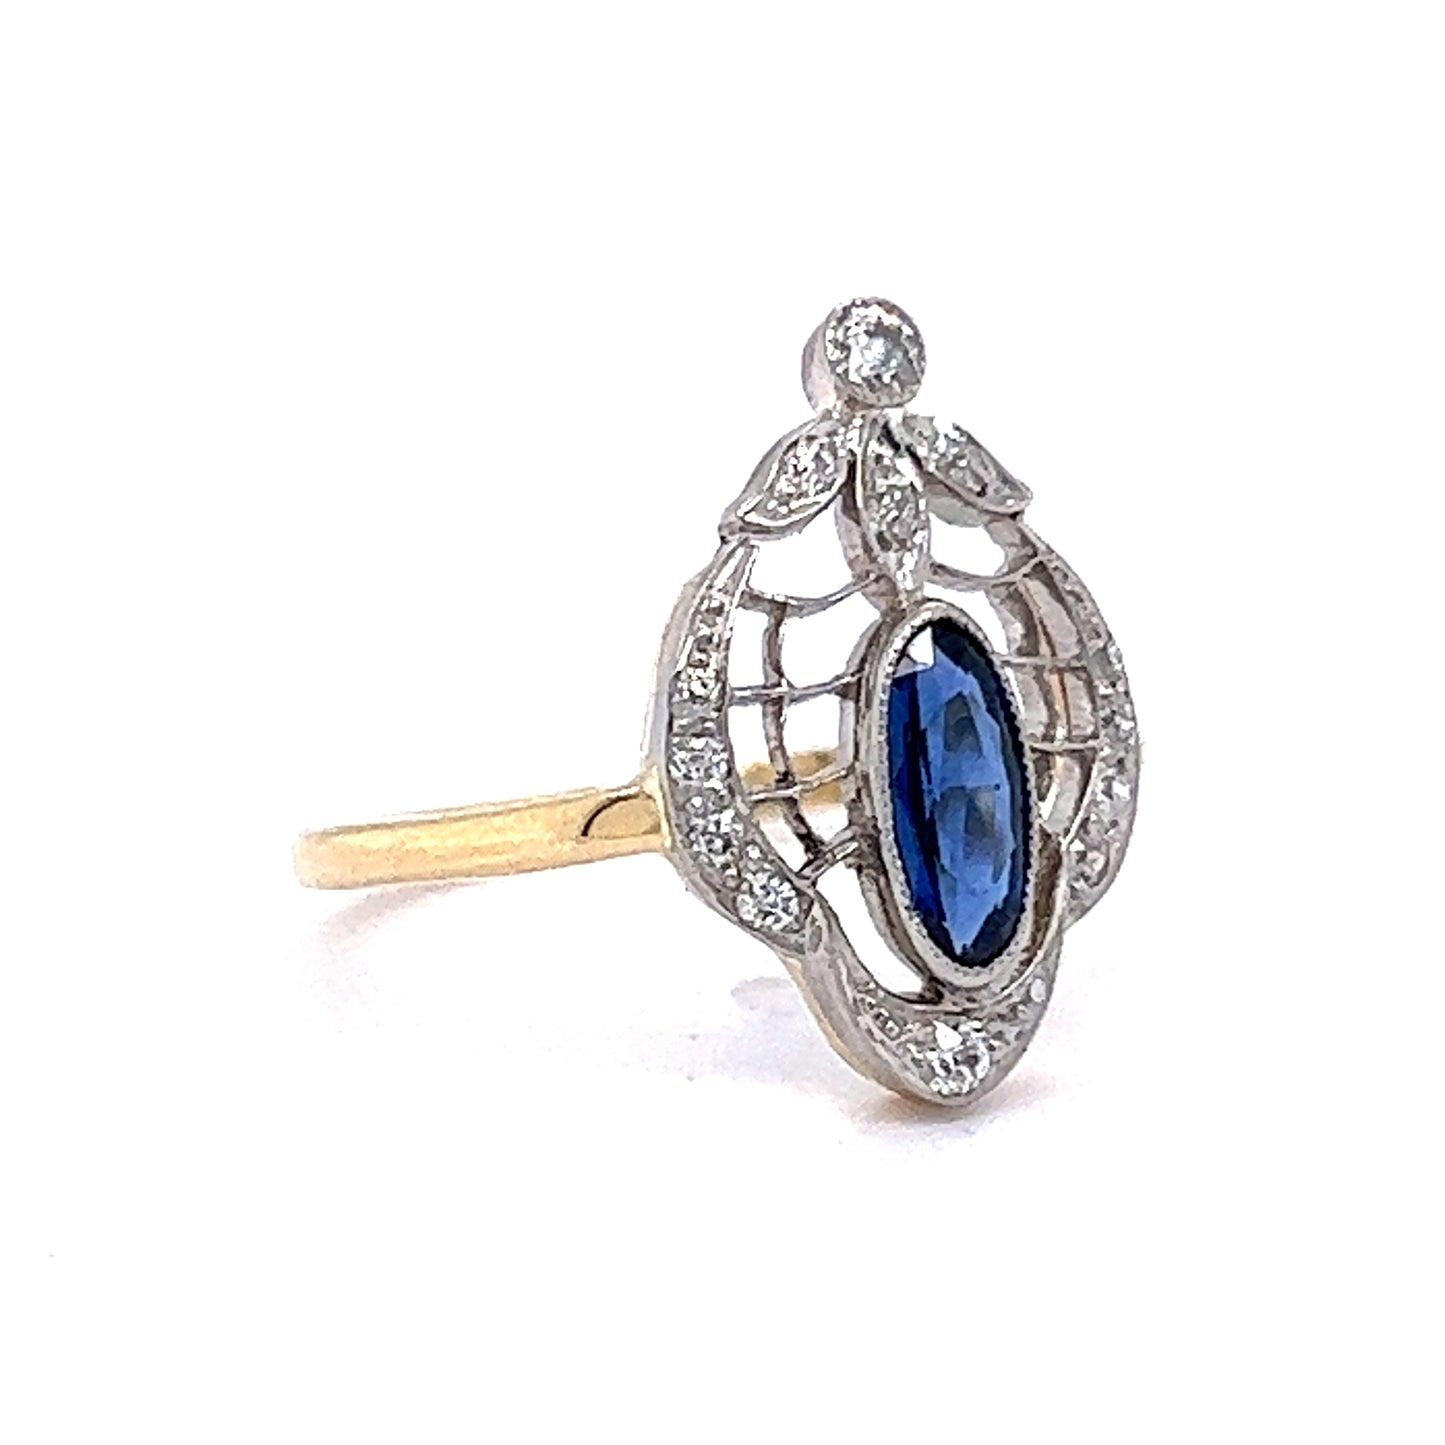 .53 Vintage Art Deco Sapphire & Diamond Right Hand Ring in 14k Gold